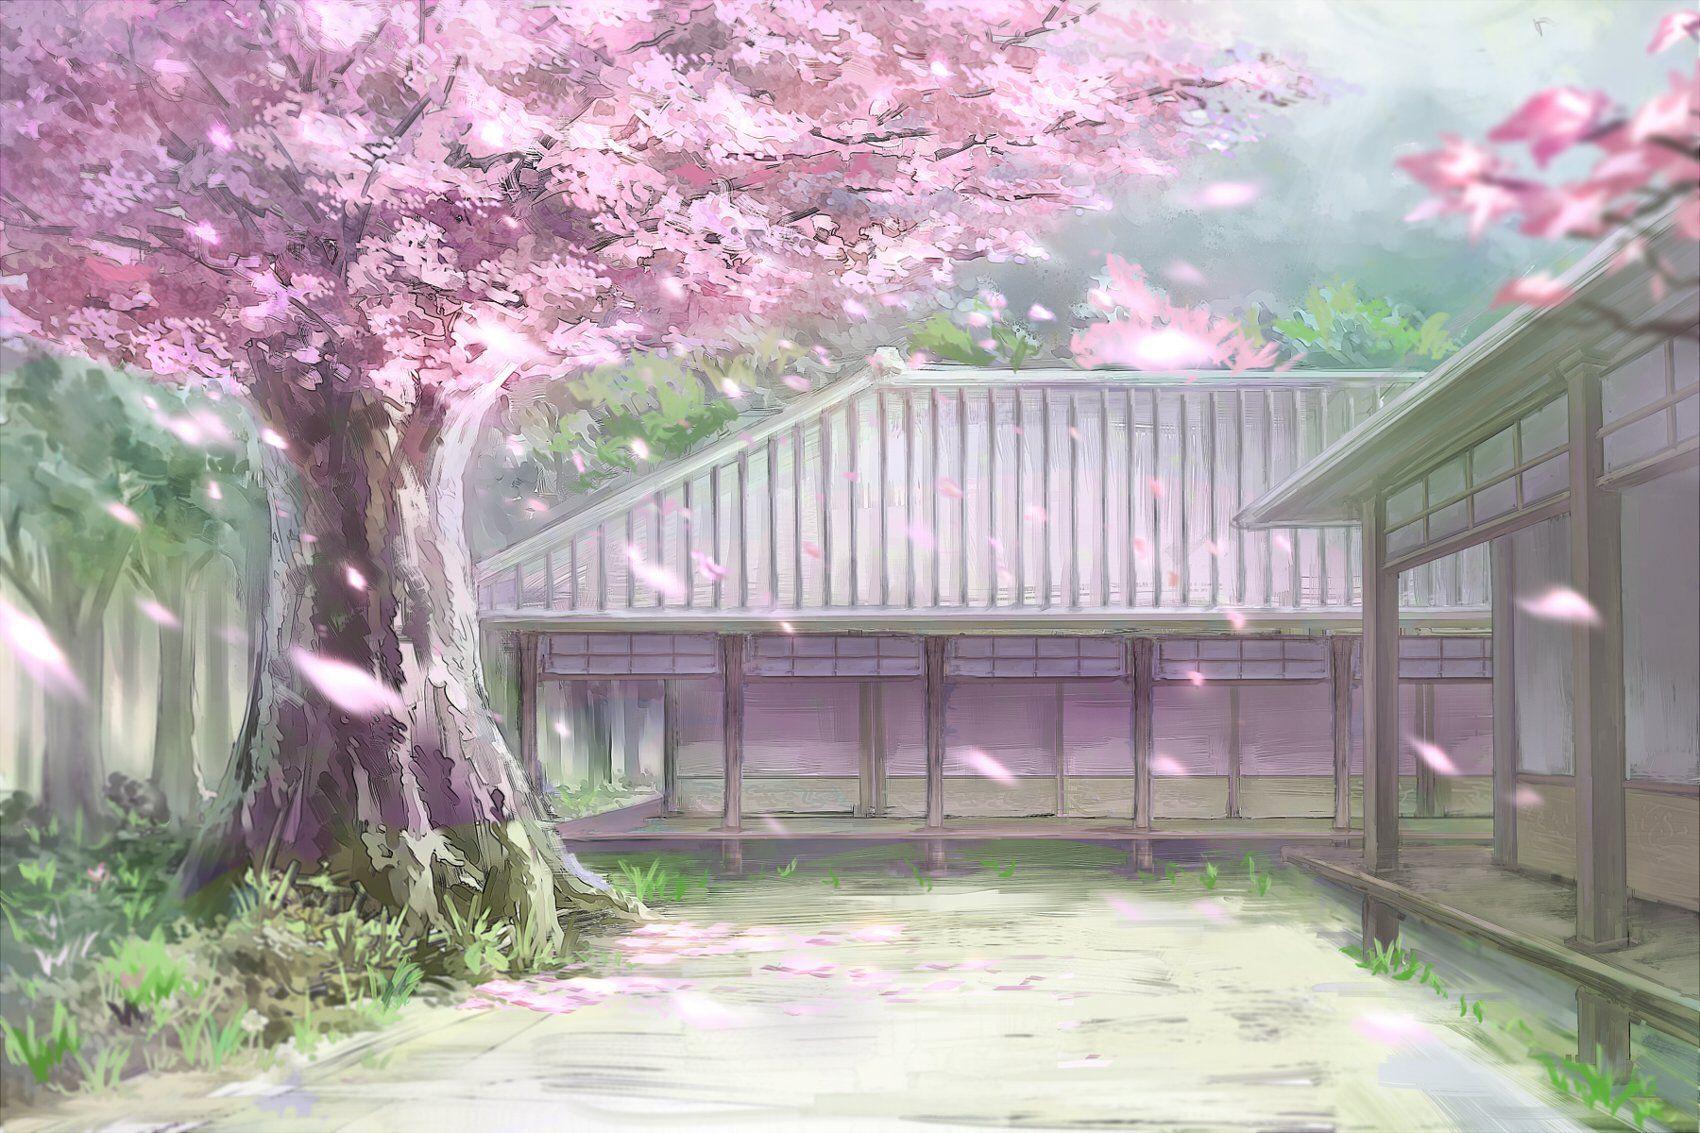 Cherry Blossoms Anime Scenery Wallpaper Free Cherry Blossoms Anime Scenery Background